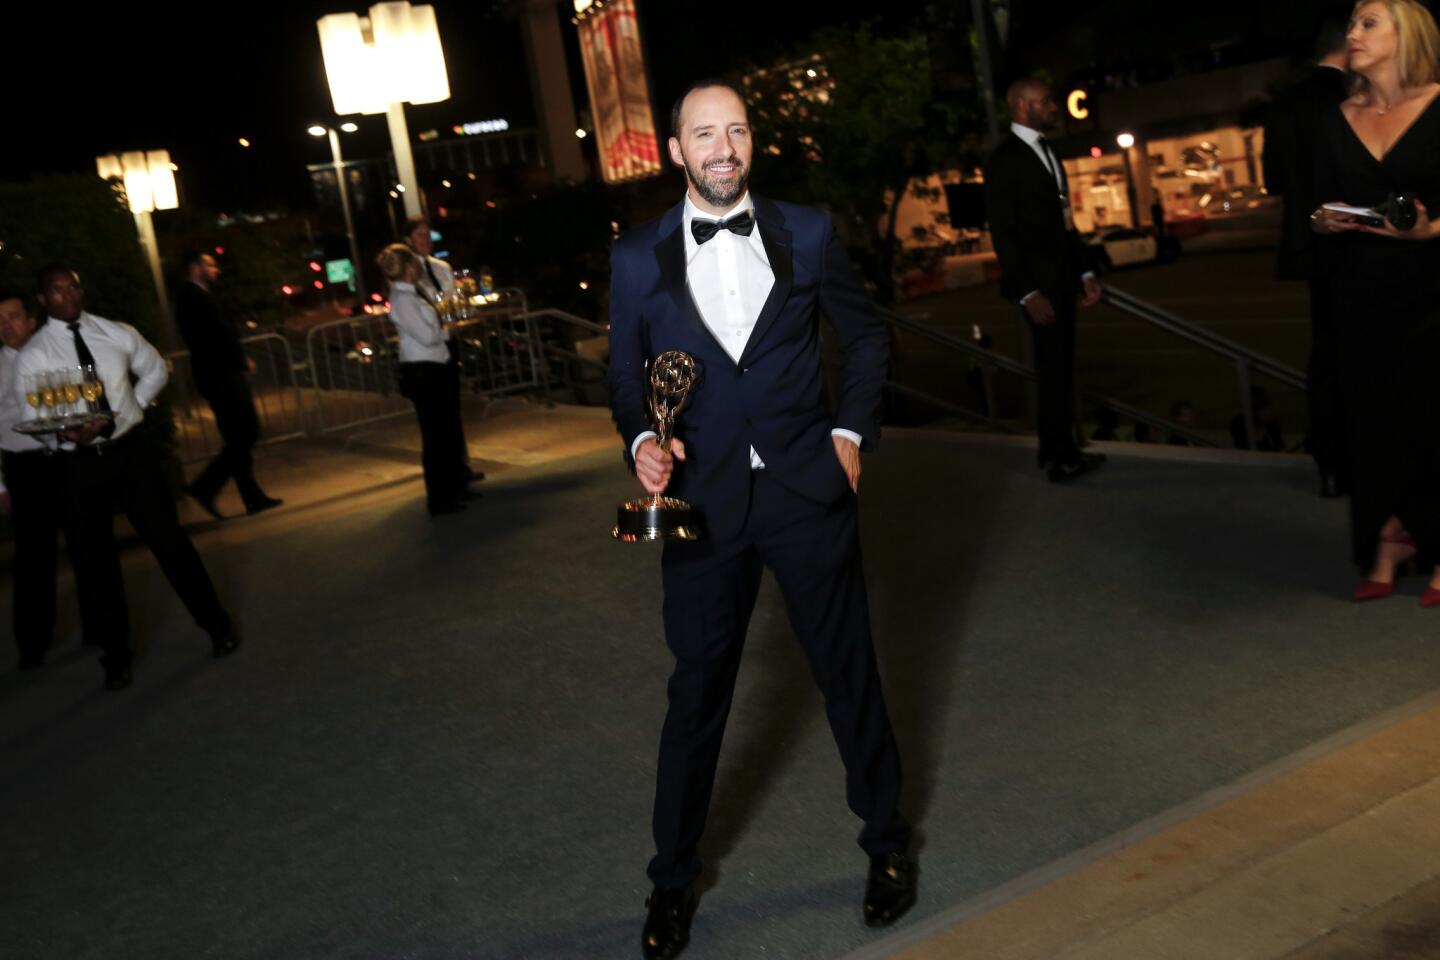 Emmys 2015 | Governors Ball